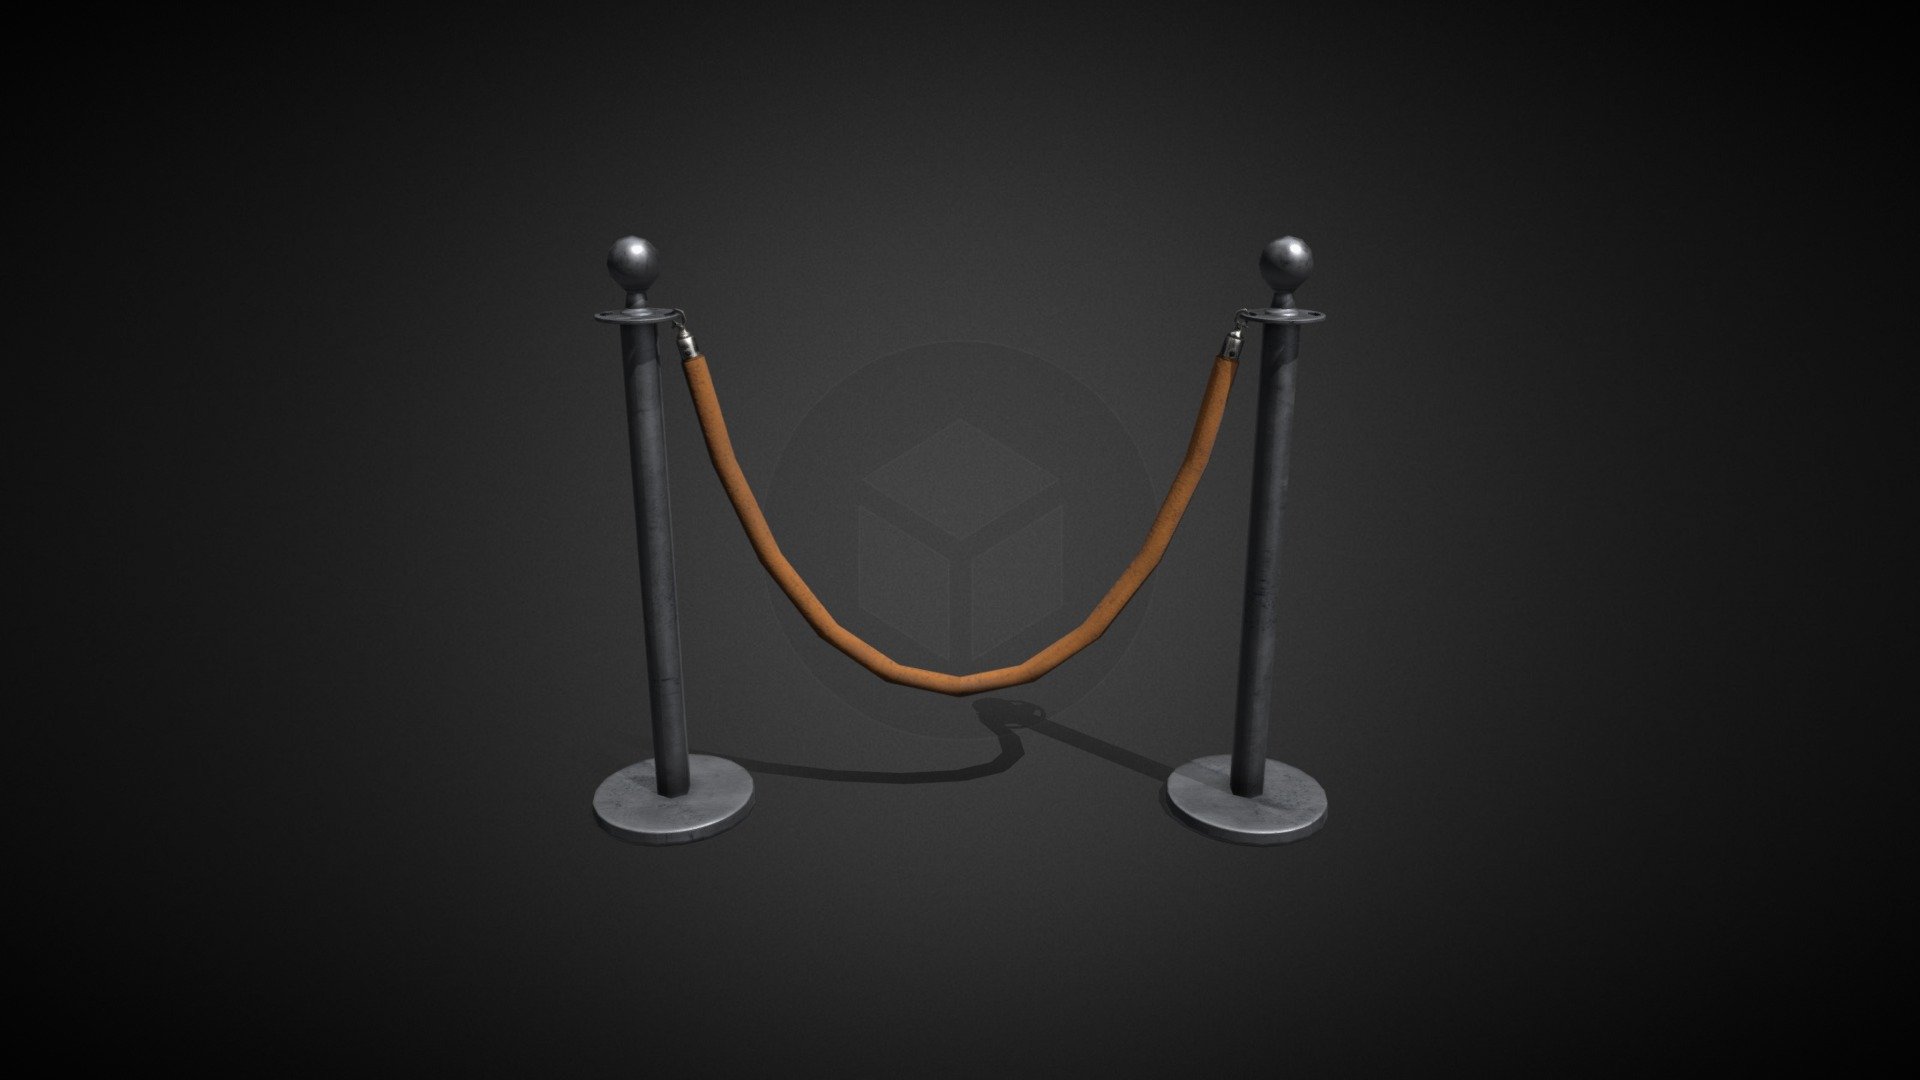 Steel Museum Fence with Mustard Cord - Museum fencing - 3D model by Mike Piven (@mihail.piven) 3d model